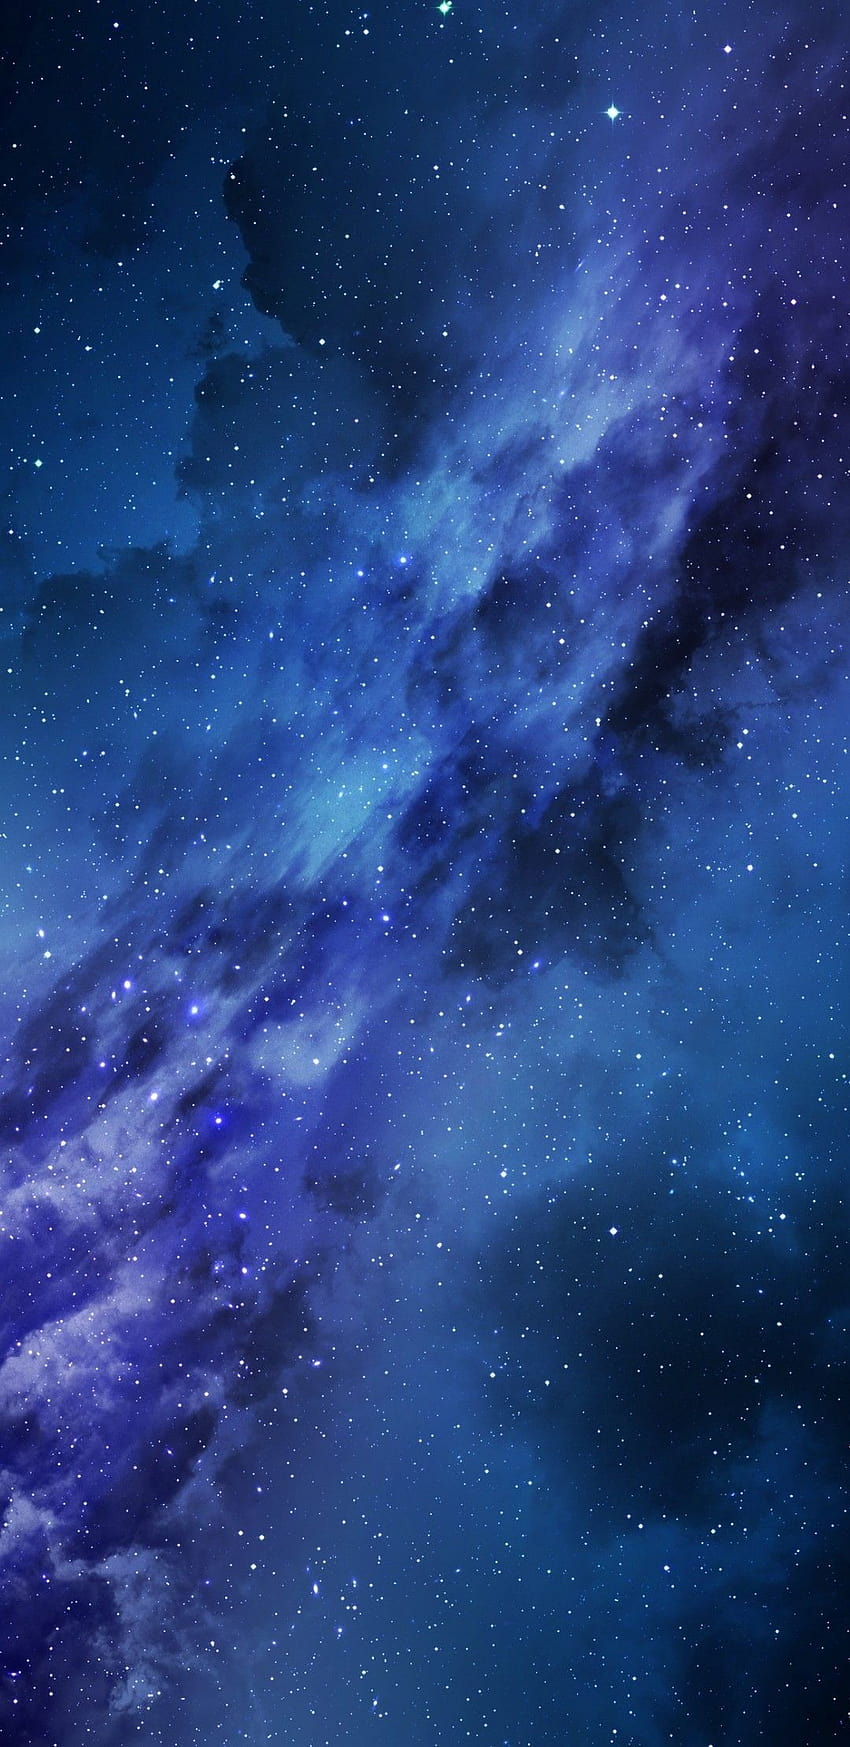 Galaxy Universe Milky Way Sky Blue Star Backgrounds, iphone blue star HD phone wallpaper